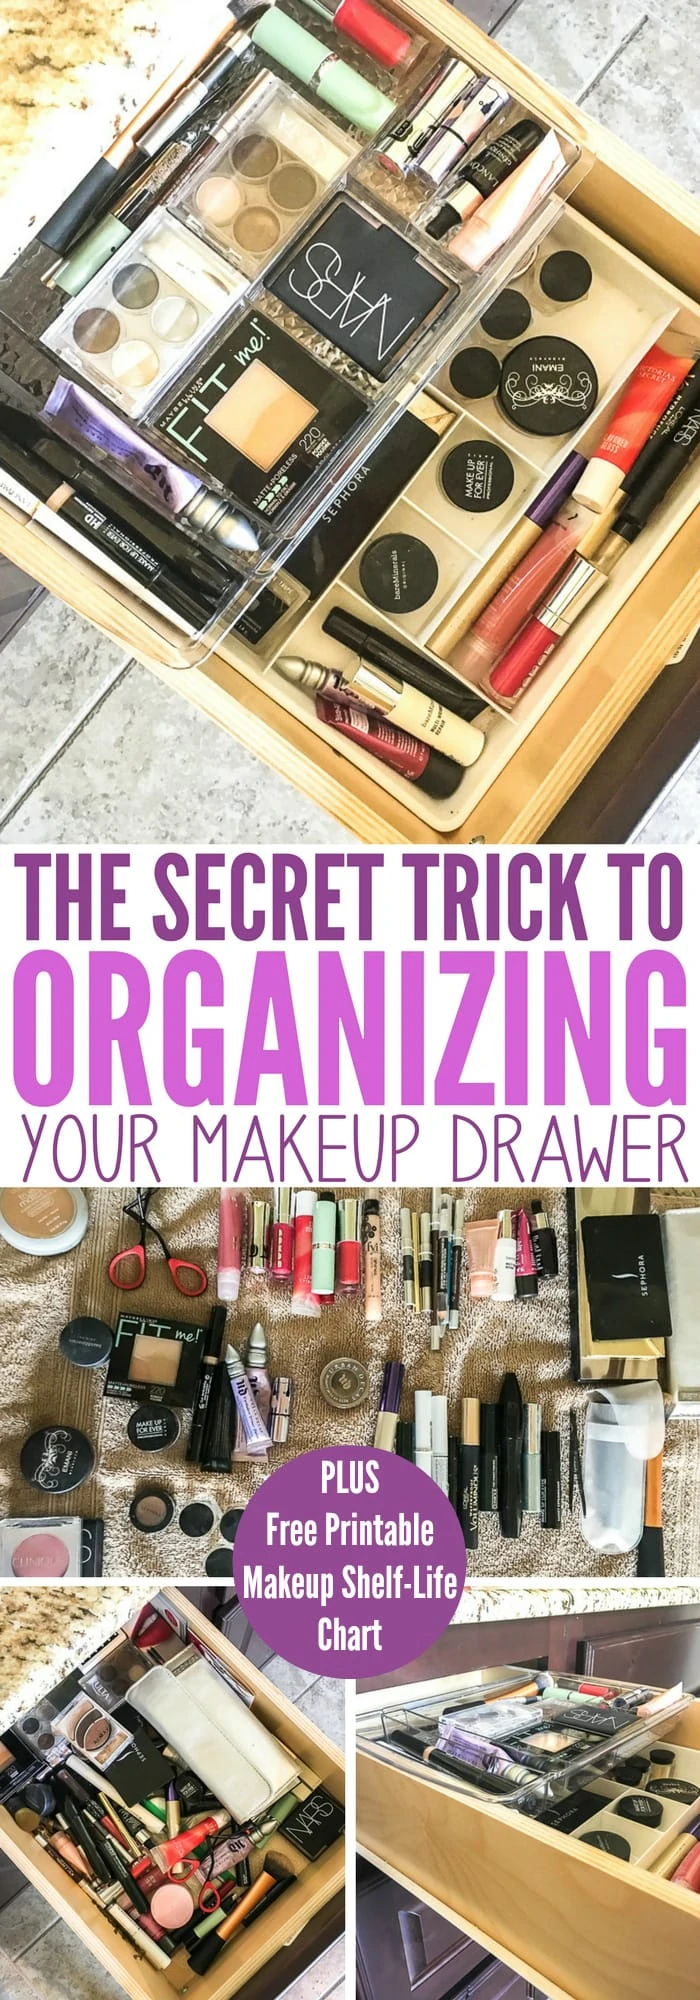 secret trick to organizing your makeup drawer collage of photos